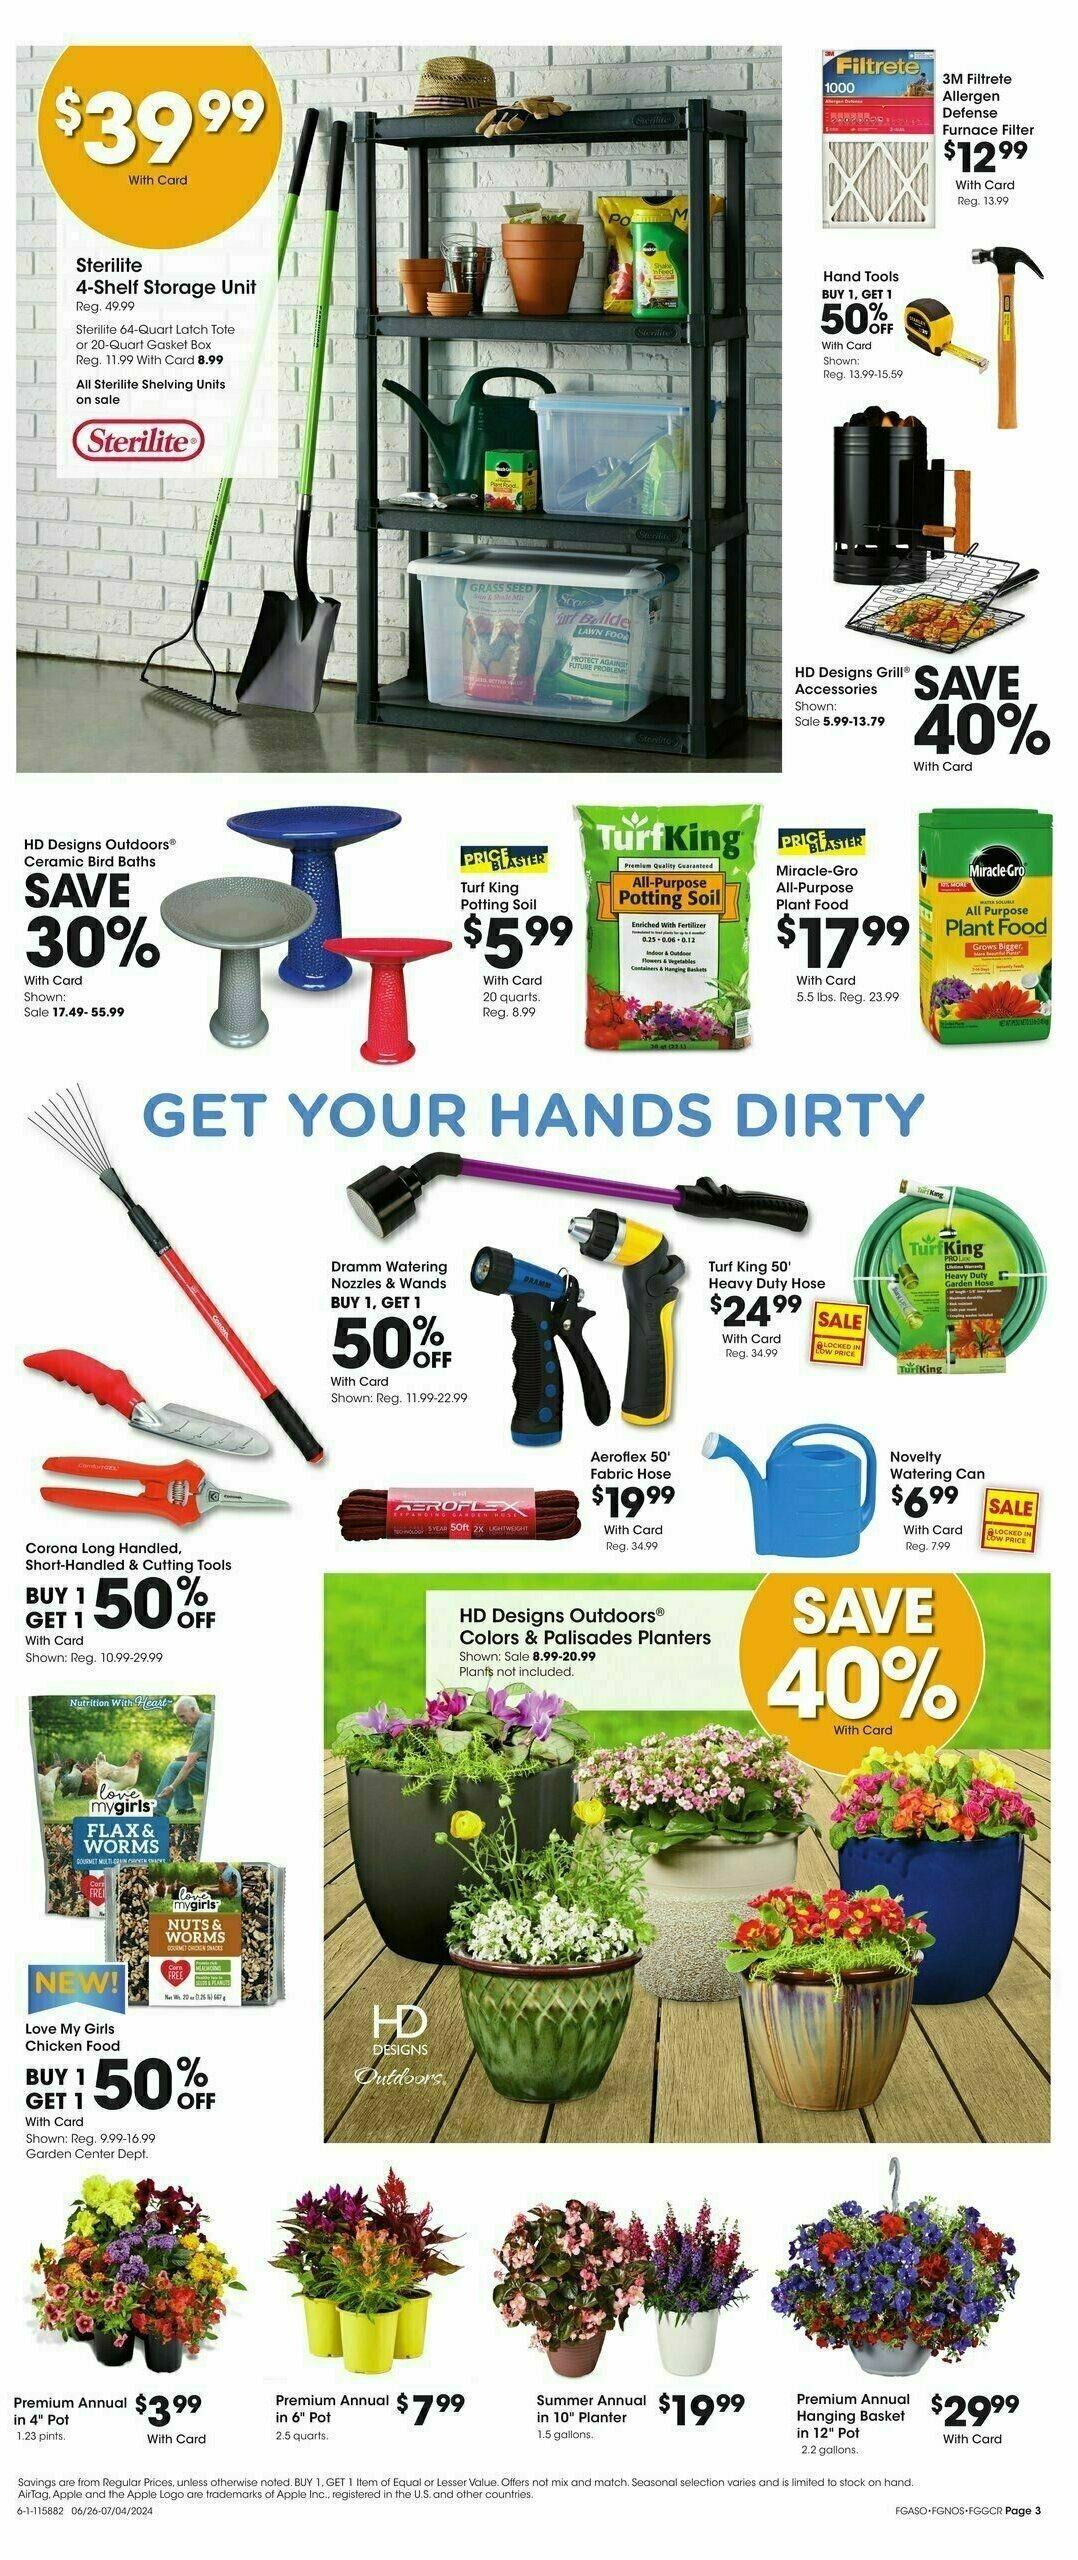 Fred Meyer General Merchandise Weekly Ad from June 26